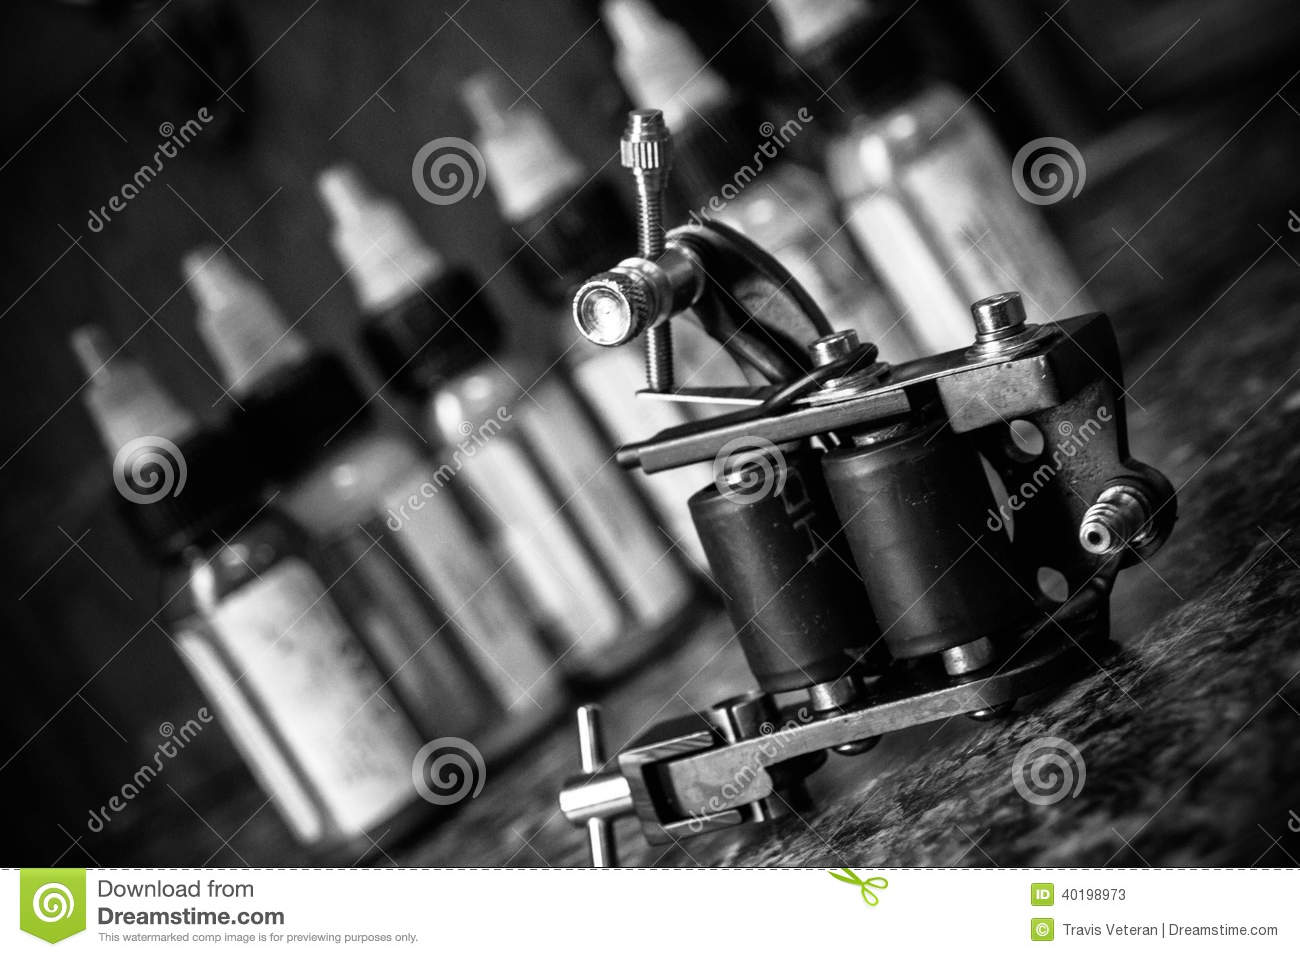 tattoo machine wallpaper hd,black and white,close up,scientific instrument,stock photography,photography